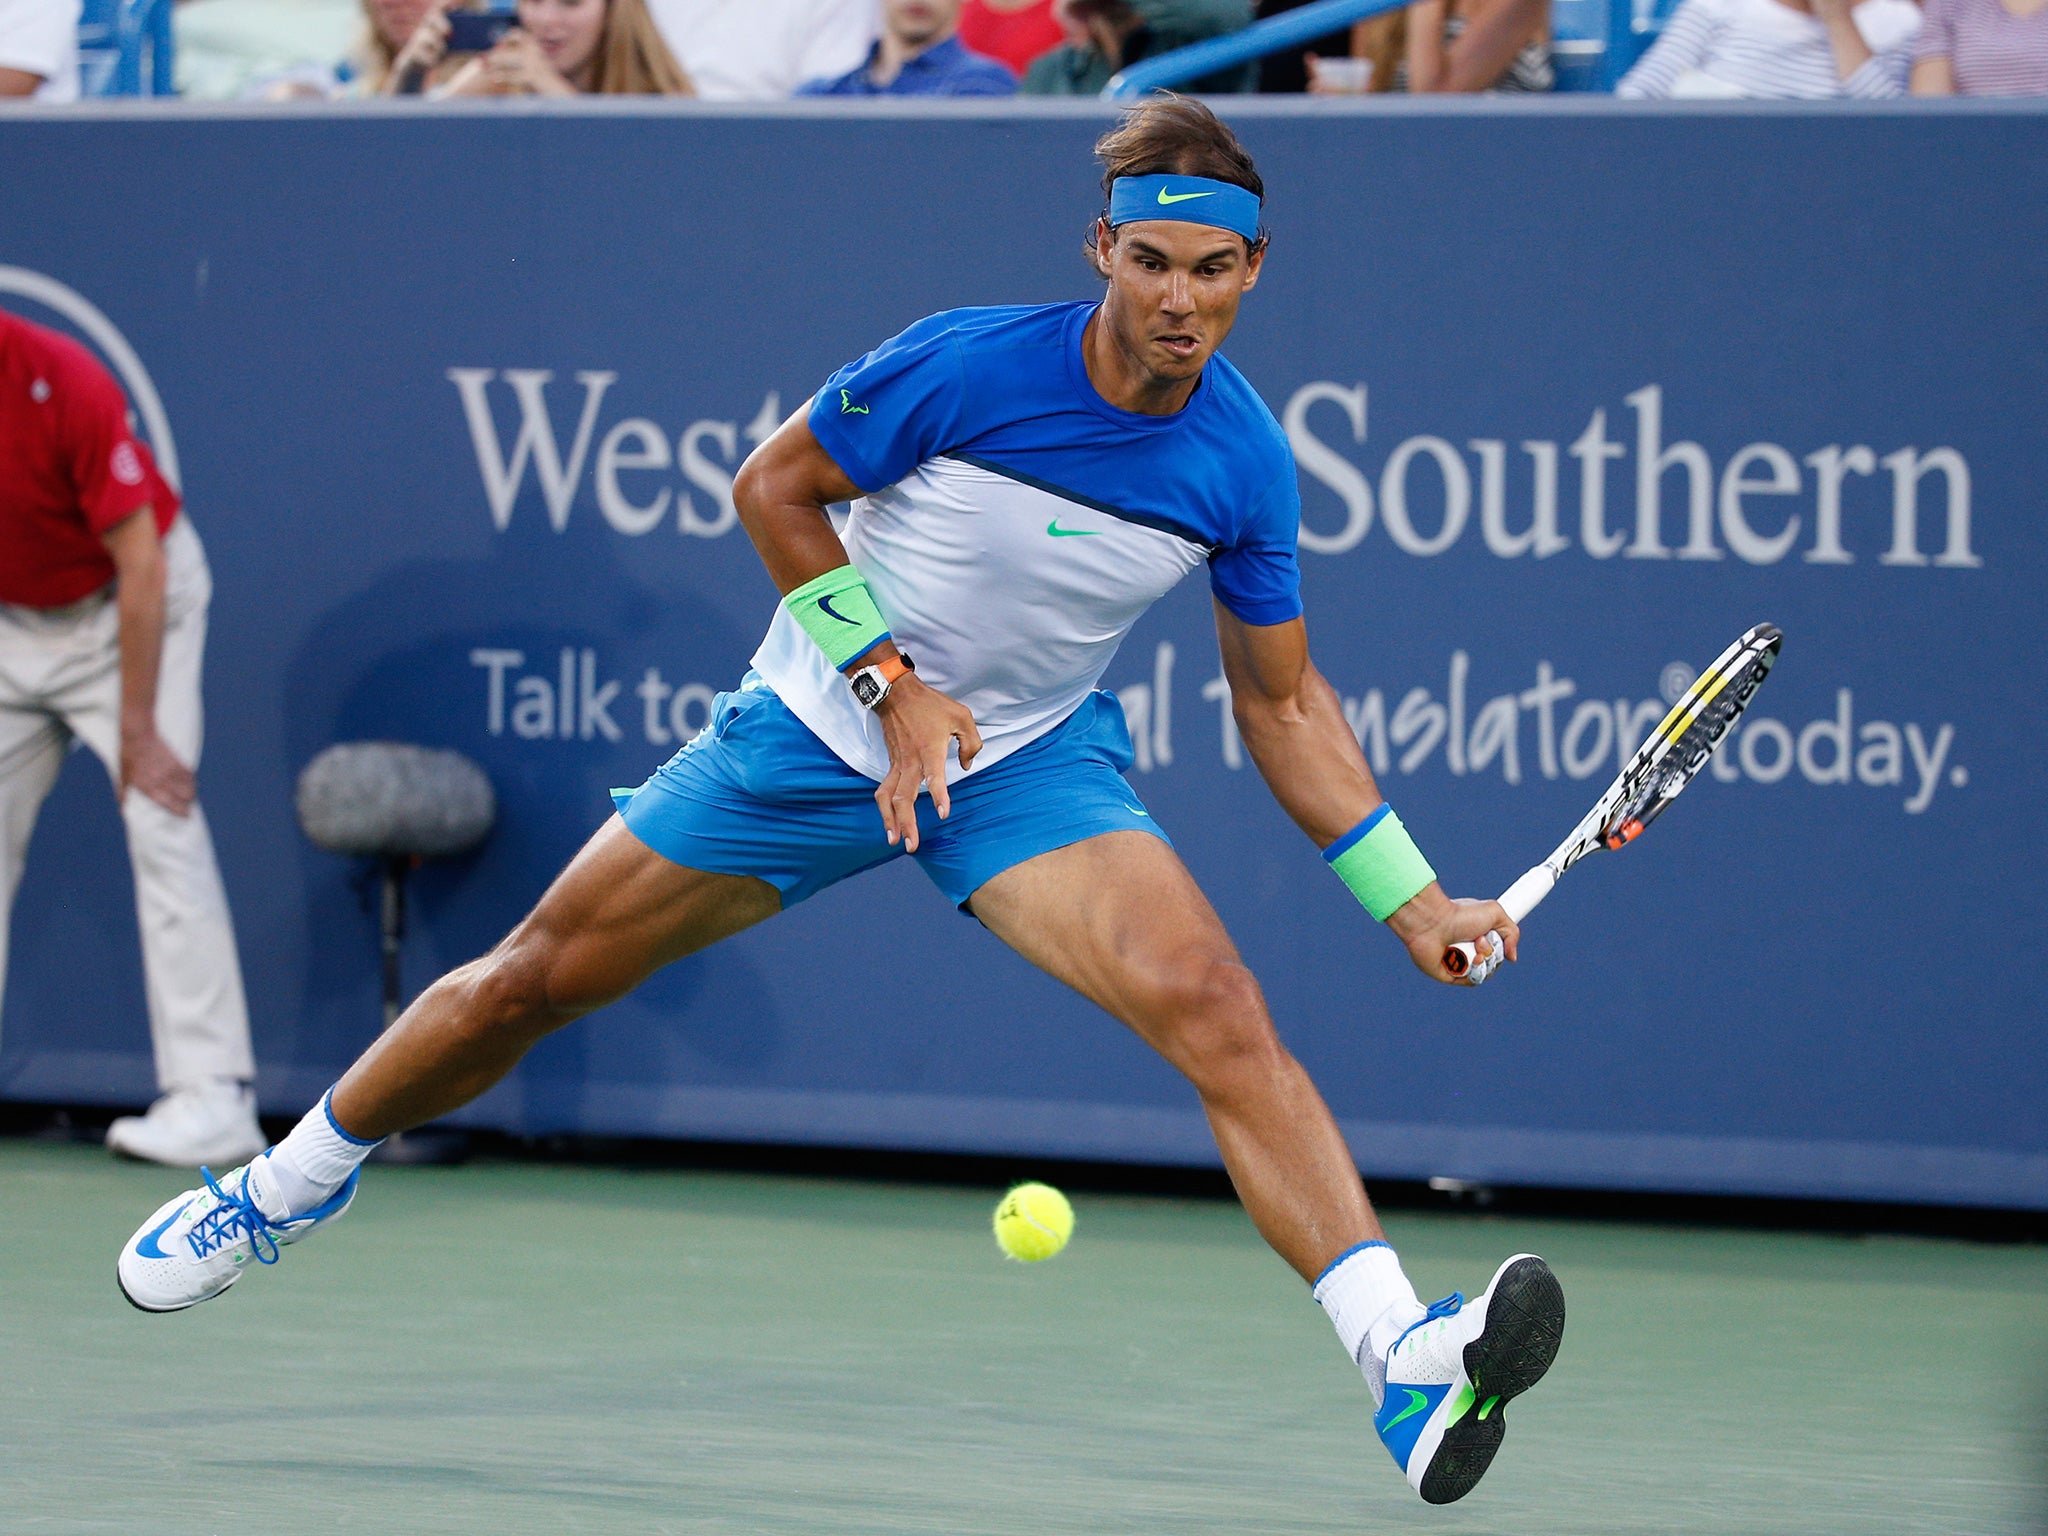 The former world No 1 Rafael Nadal has not won a Grand Slam or Masters event since mid 2014